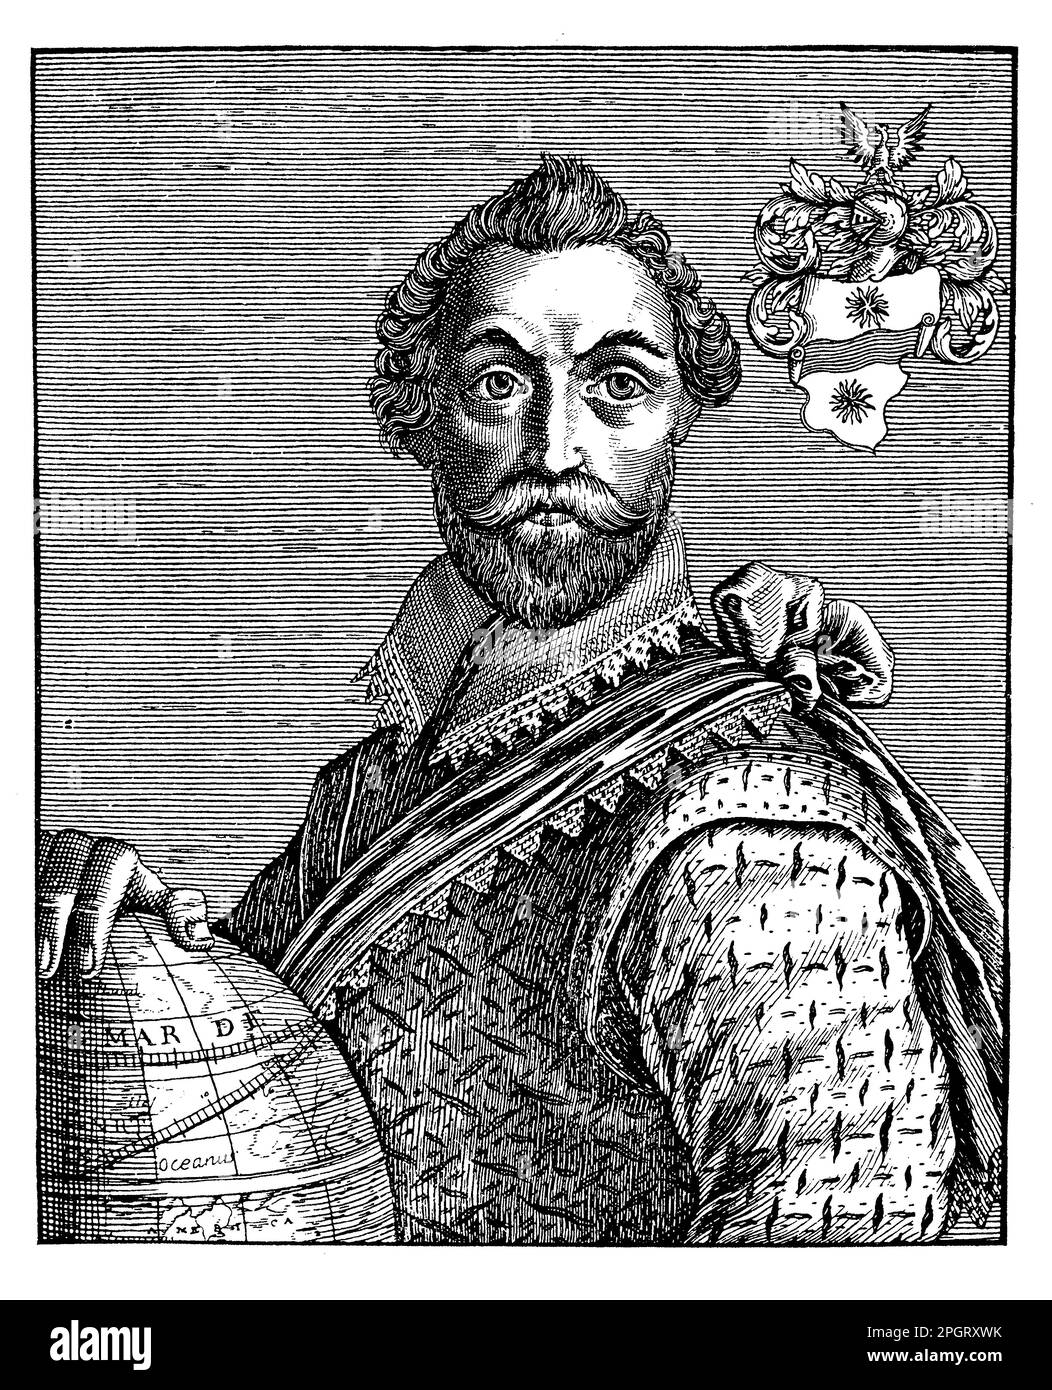 Francis Drake was an English sea captain, privateer, and explorer who lived from c. 1540-1596. He is best known for his circumnavigation of the globe and his involvement in defeating the Spanish Armada. Drake was also involved in piracy and slave trading, and was knighted by Queen Elizabeth I for his achievements. Stock Photo